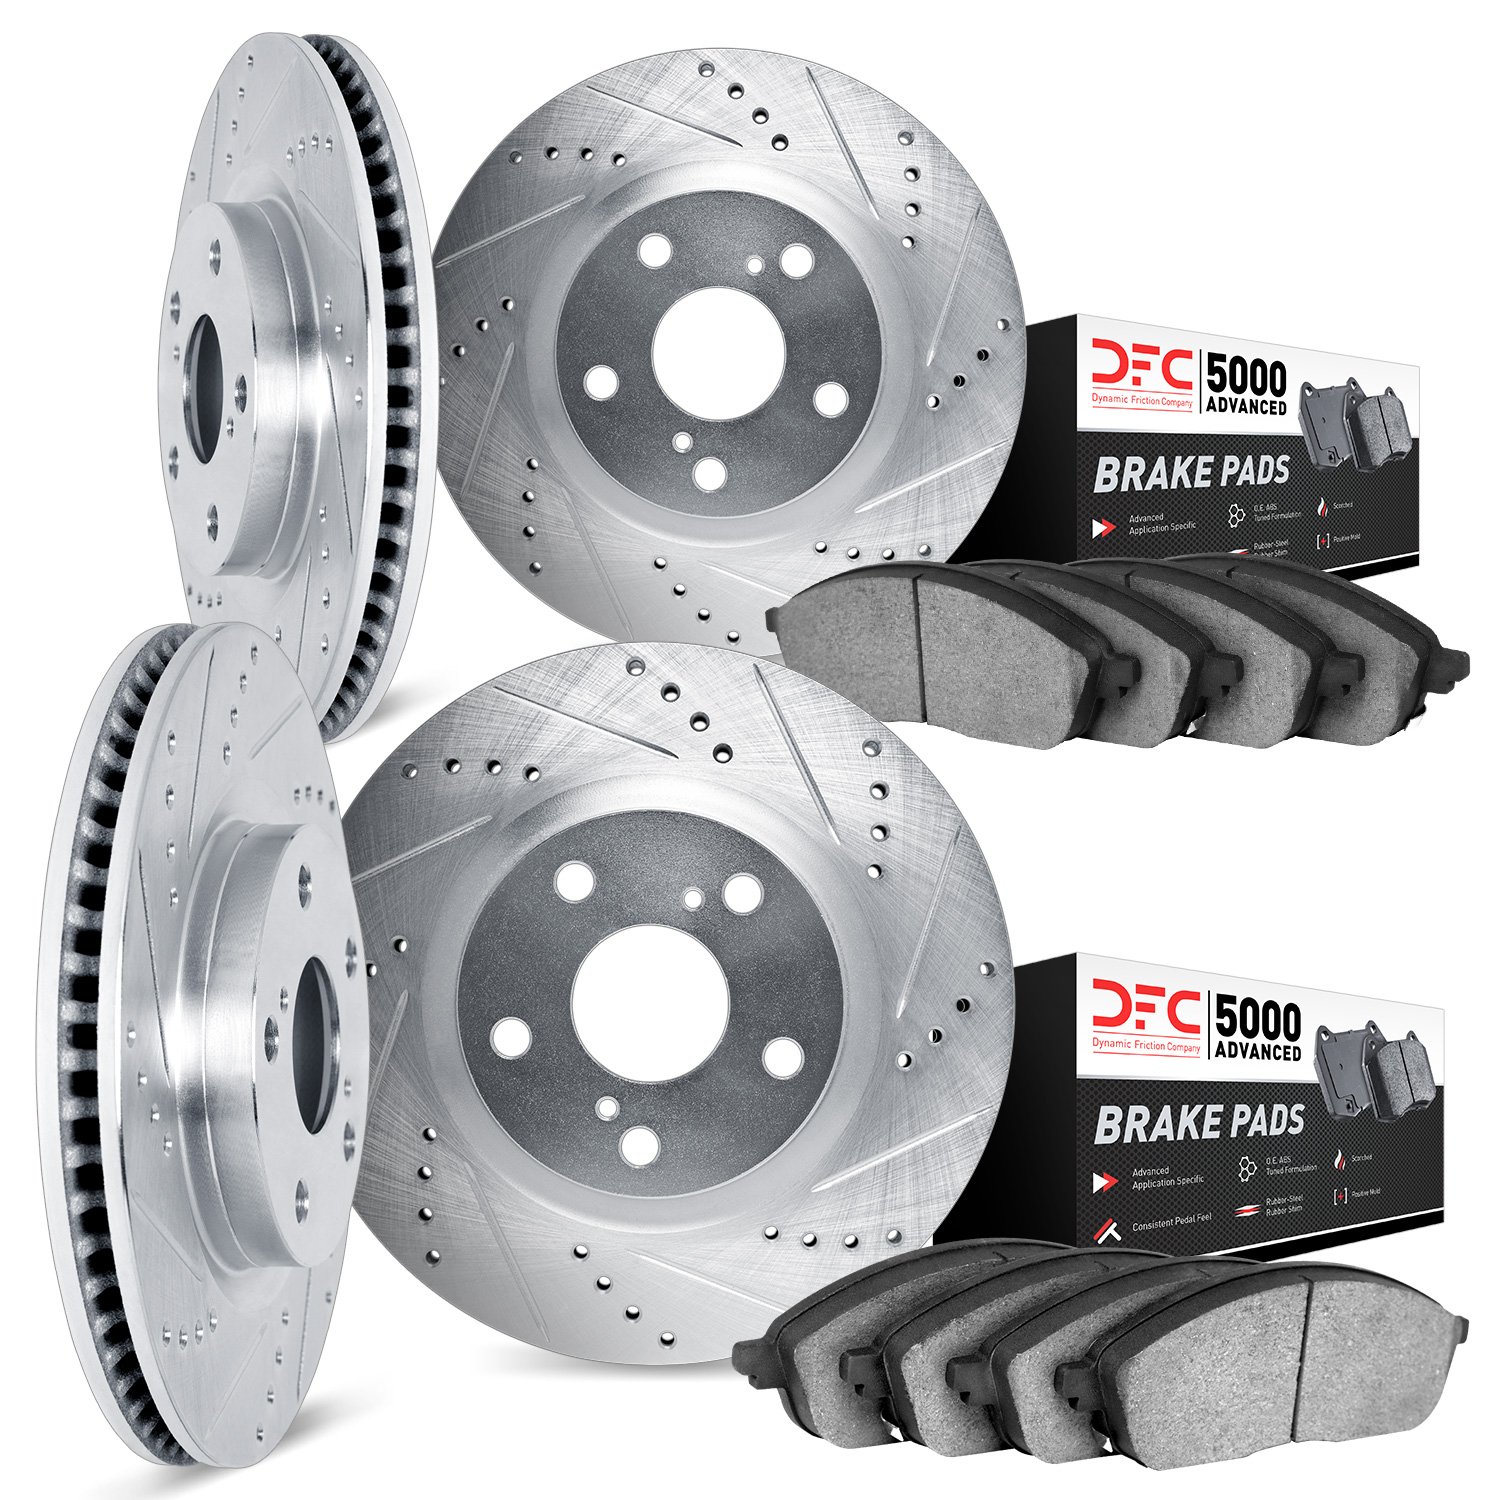 7504-31055 Drilled/Slotted Brake Rotors w/5000 Advanced Brake Pads Kit [Silver], Fits Select BMW, Position: Front and Rear